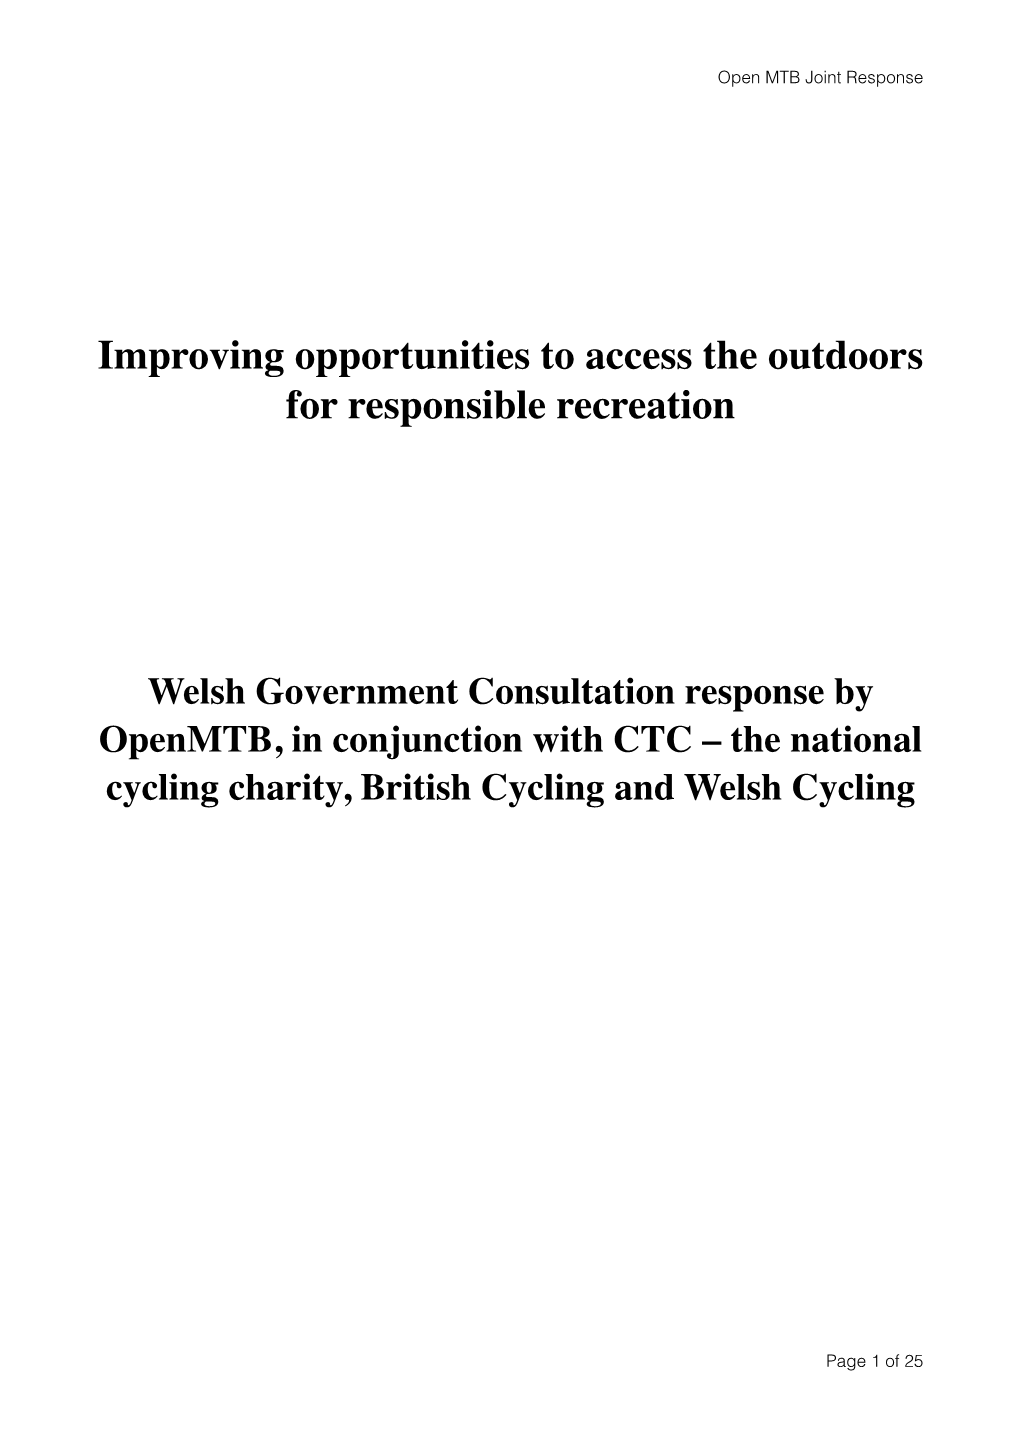 Wales Consultation Response Final Confirmed